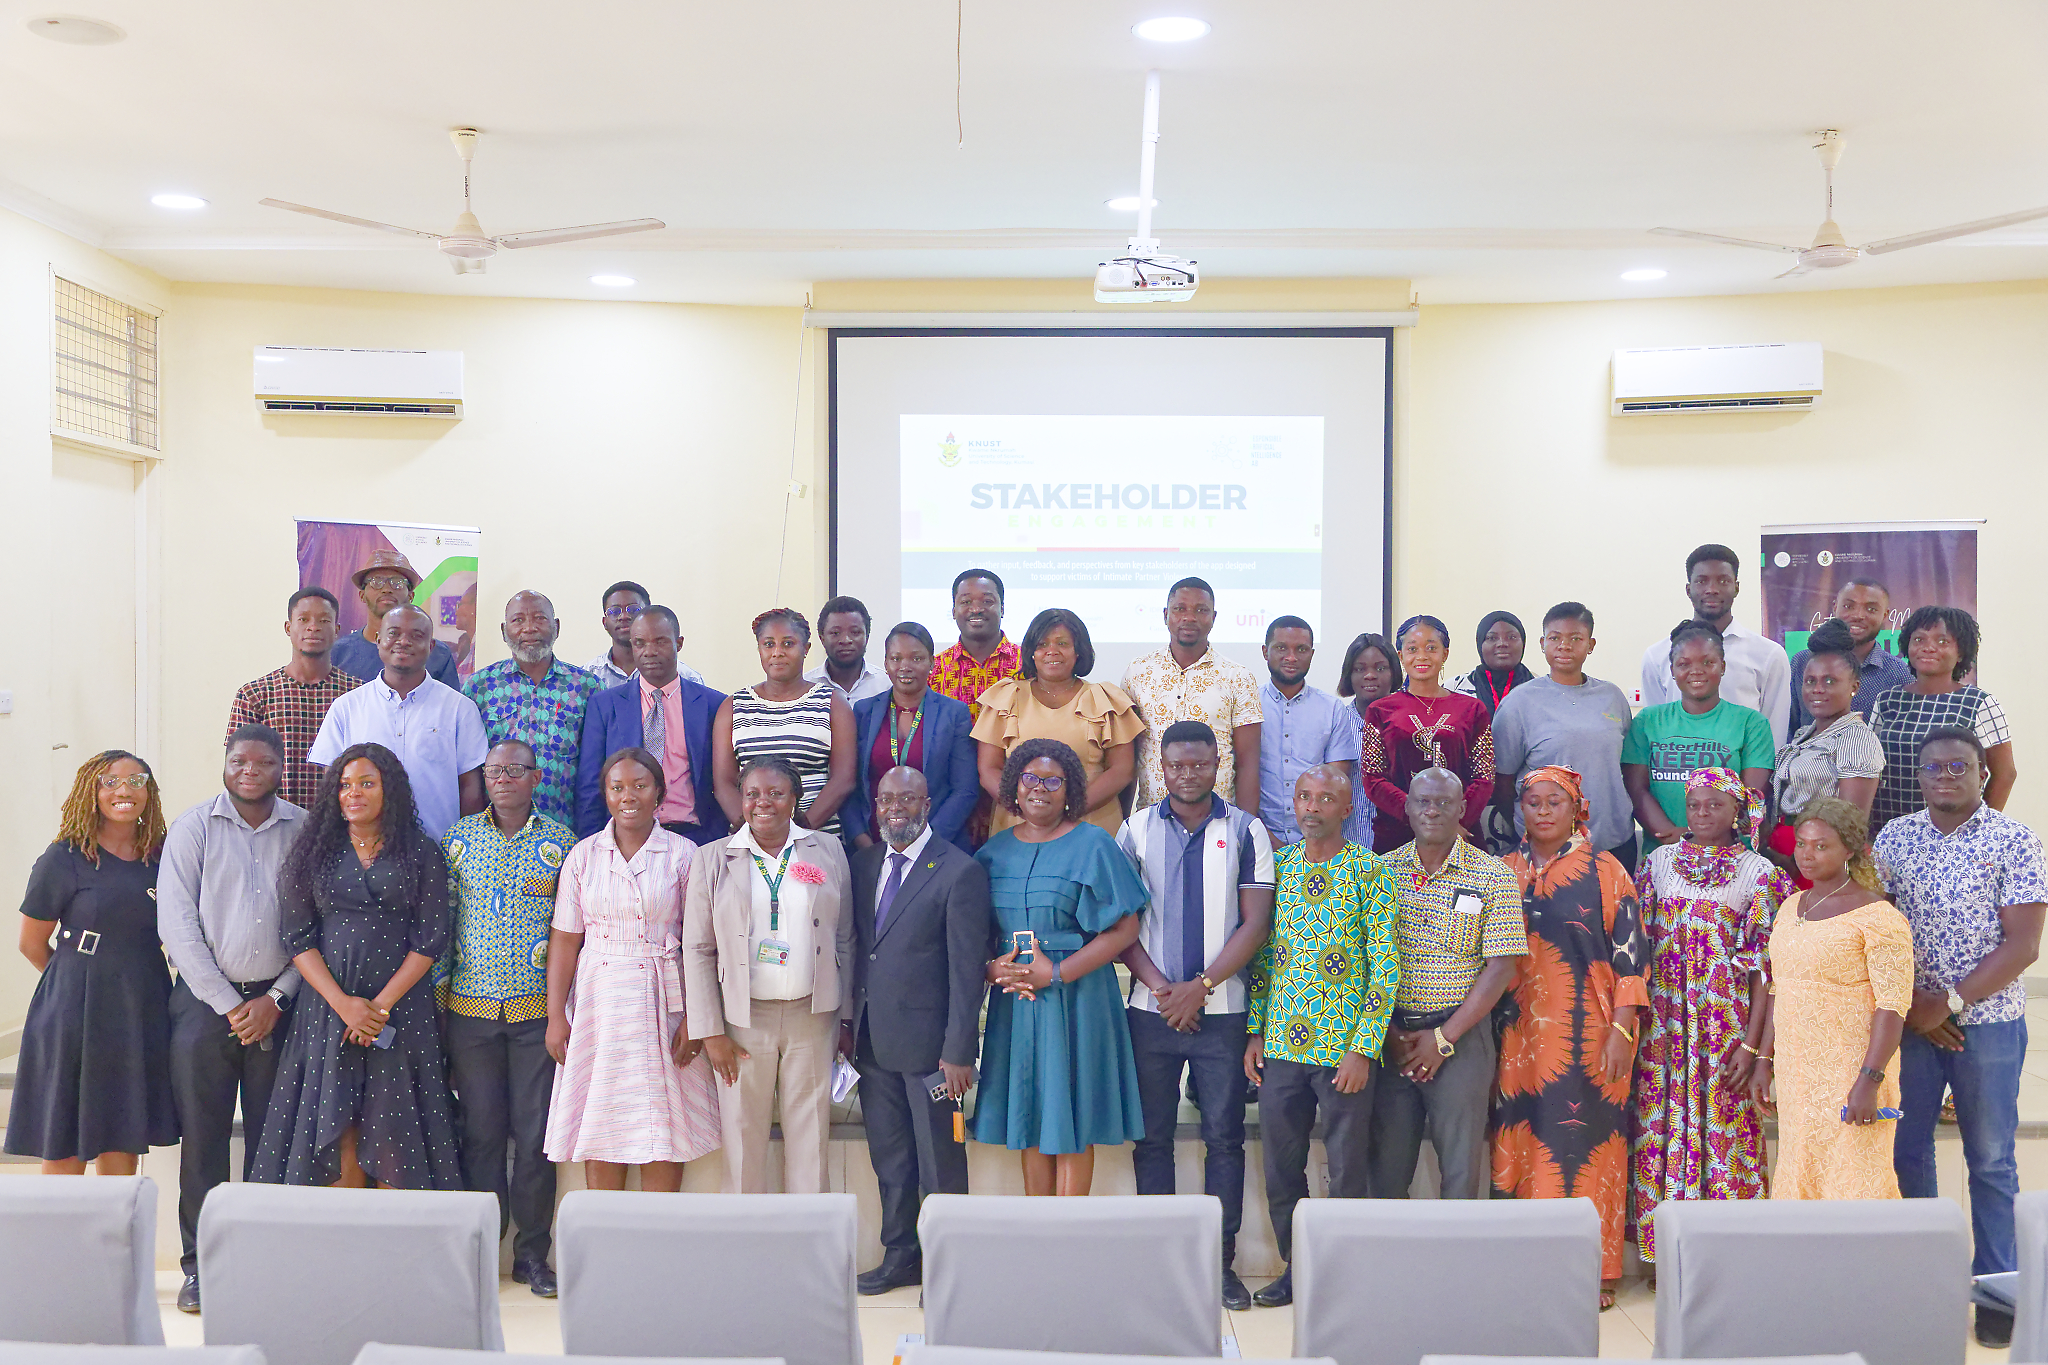 Group photograph of participants after the stakeholder engagement